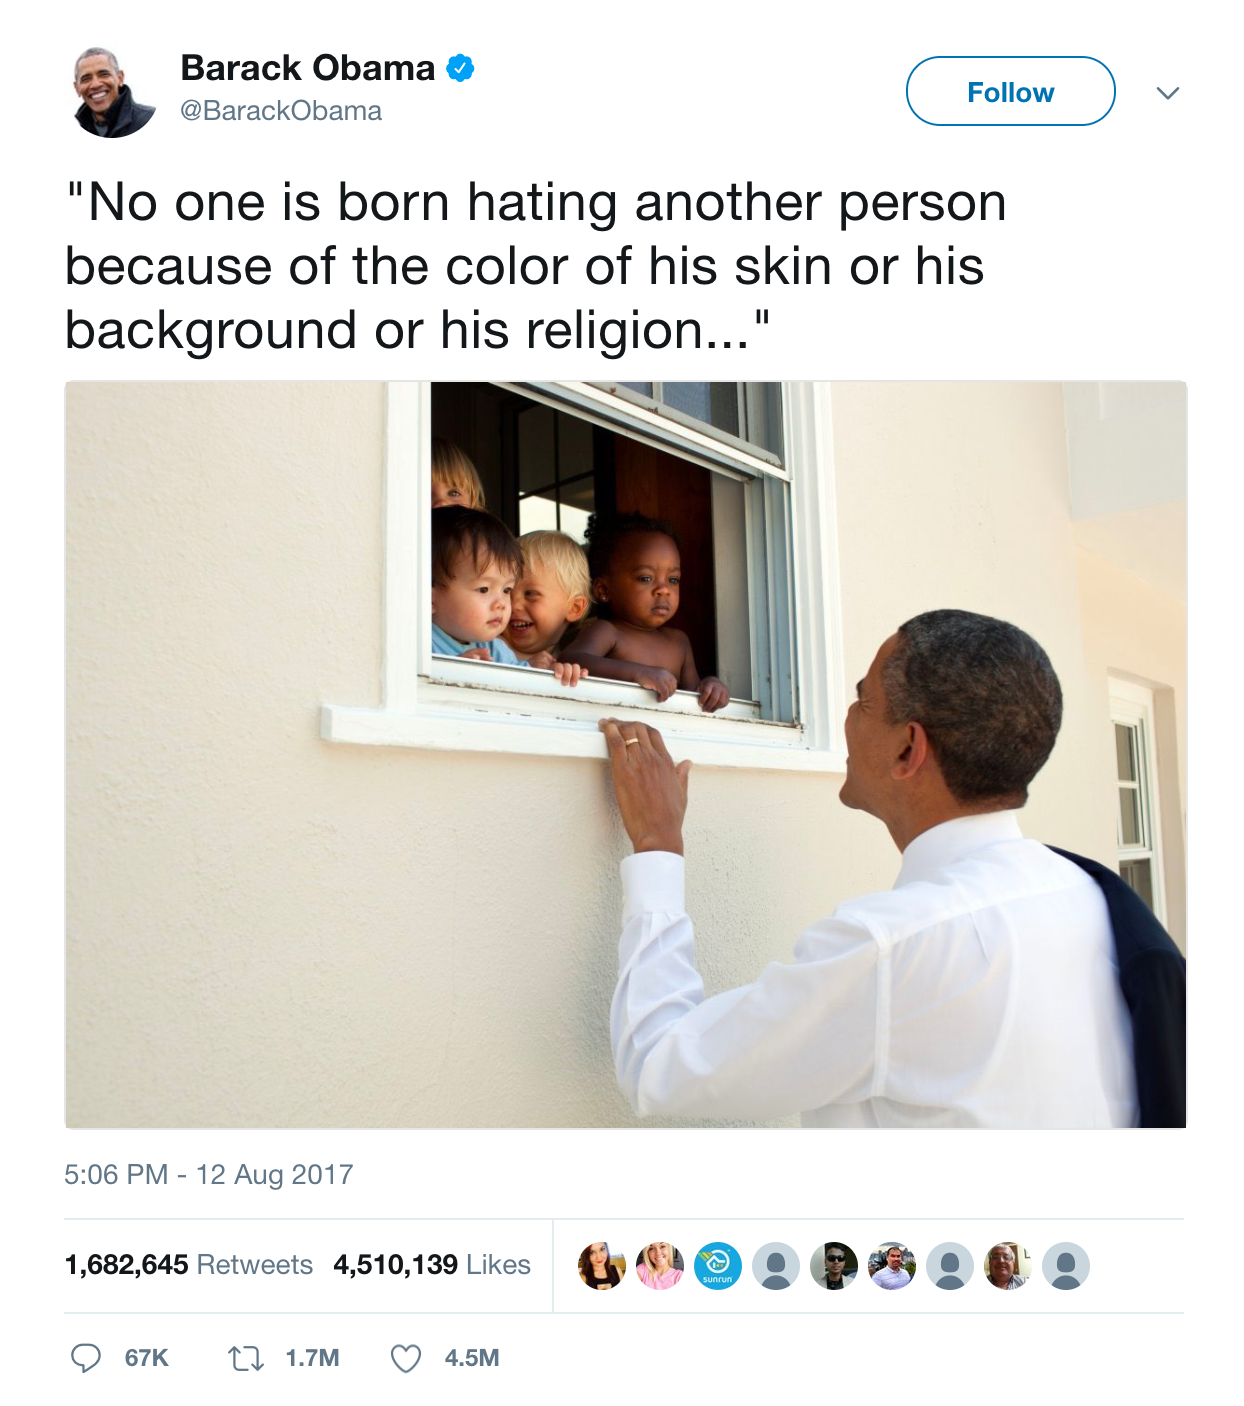 barack-obama-tweet-no-one-is-born-hating-another-person-because-of-the-color-of-his-skin-or-his-background-or-religion-most-liked-tweet-ever-2017-nelson-mandela-quote